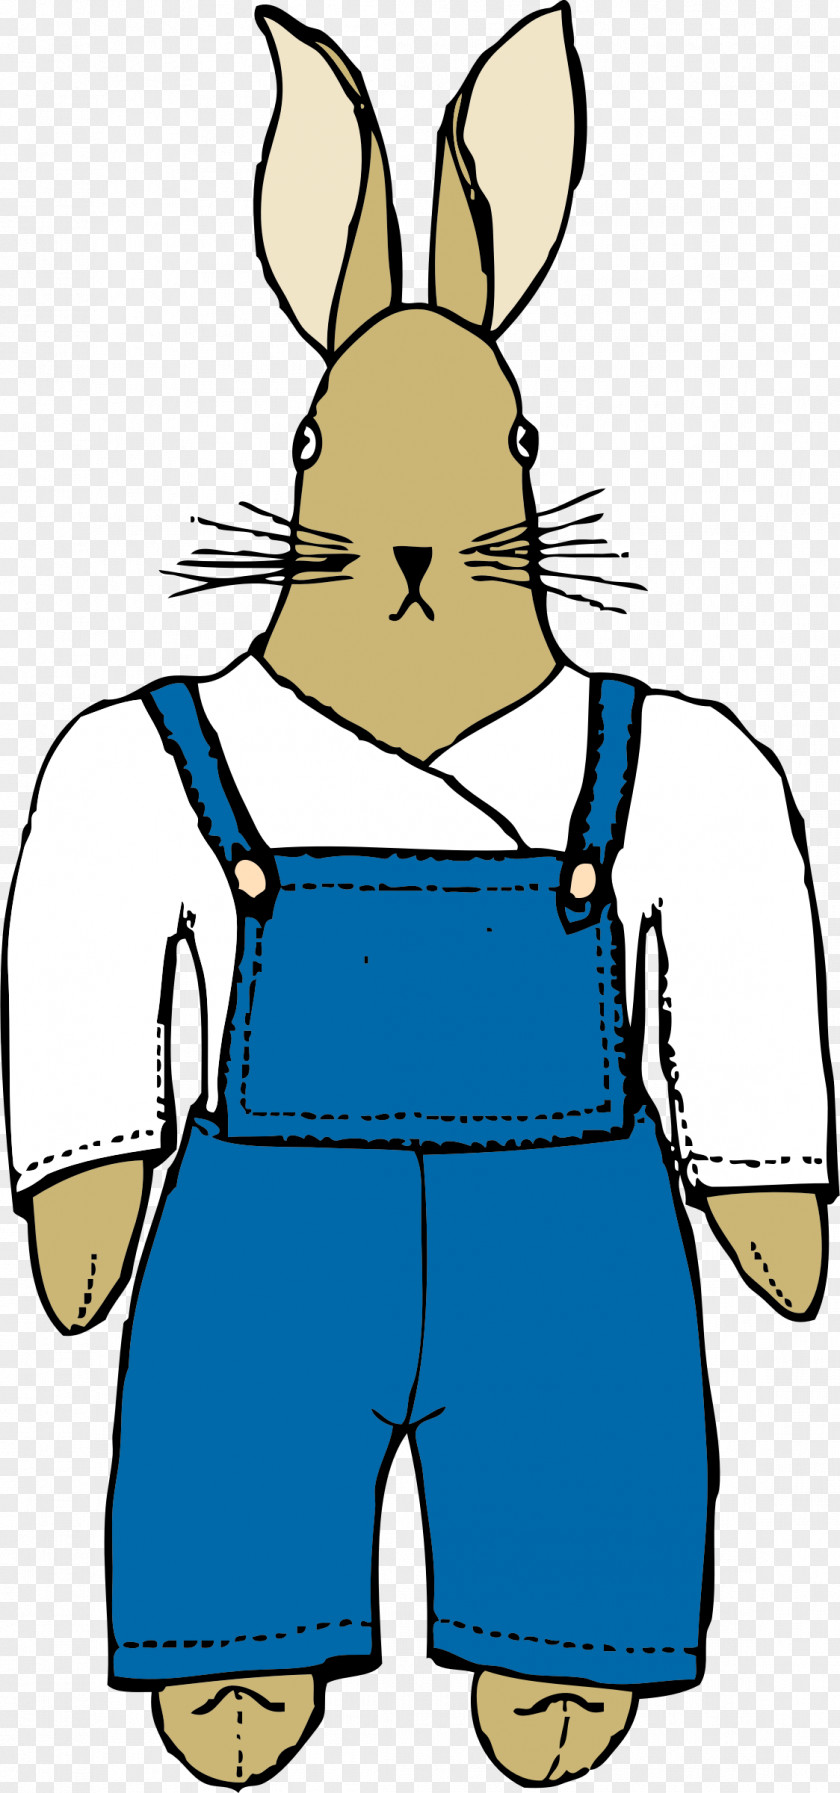 Bunnies Overall Clothing Clip Art PNG